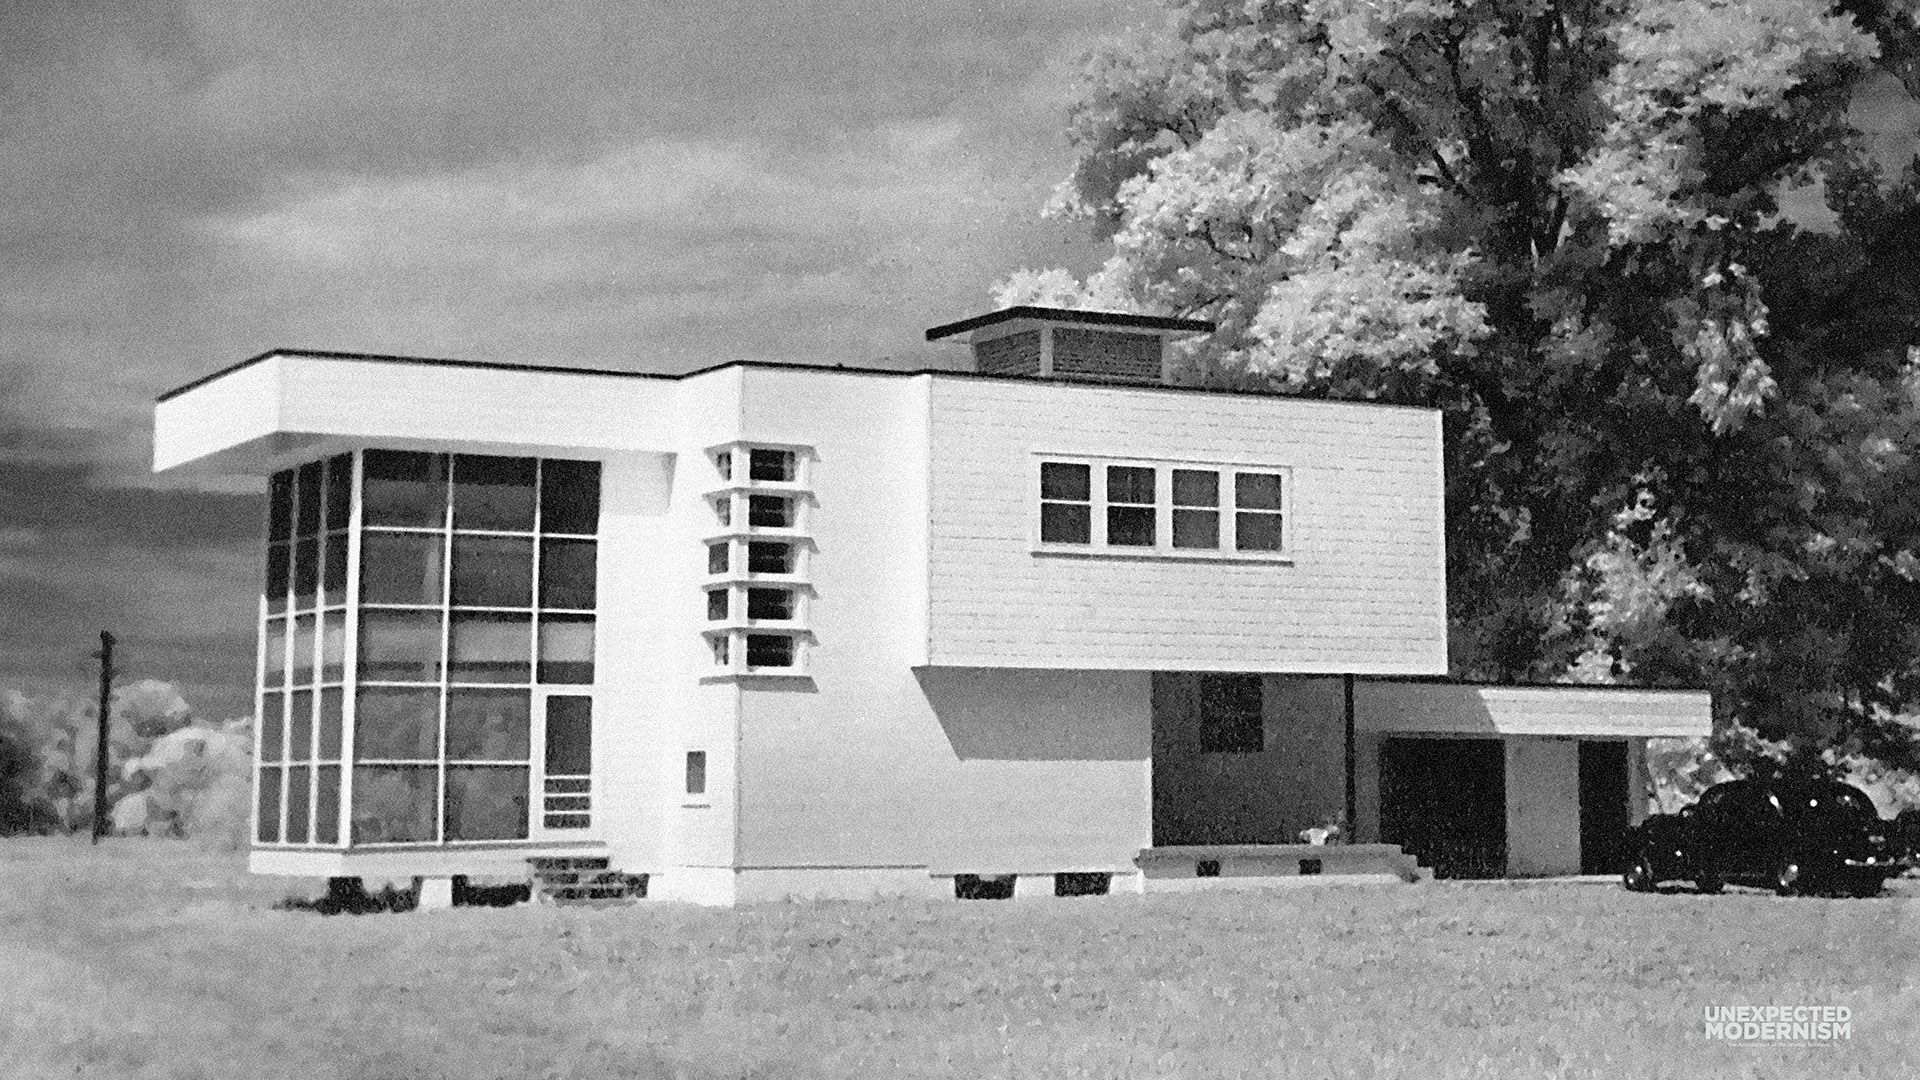 Unexpected Modernism: The architecture of the Wiener Brothers